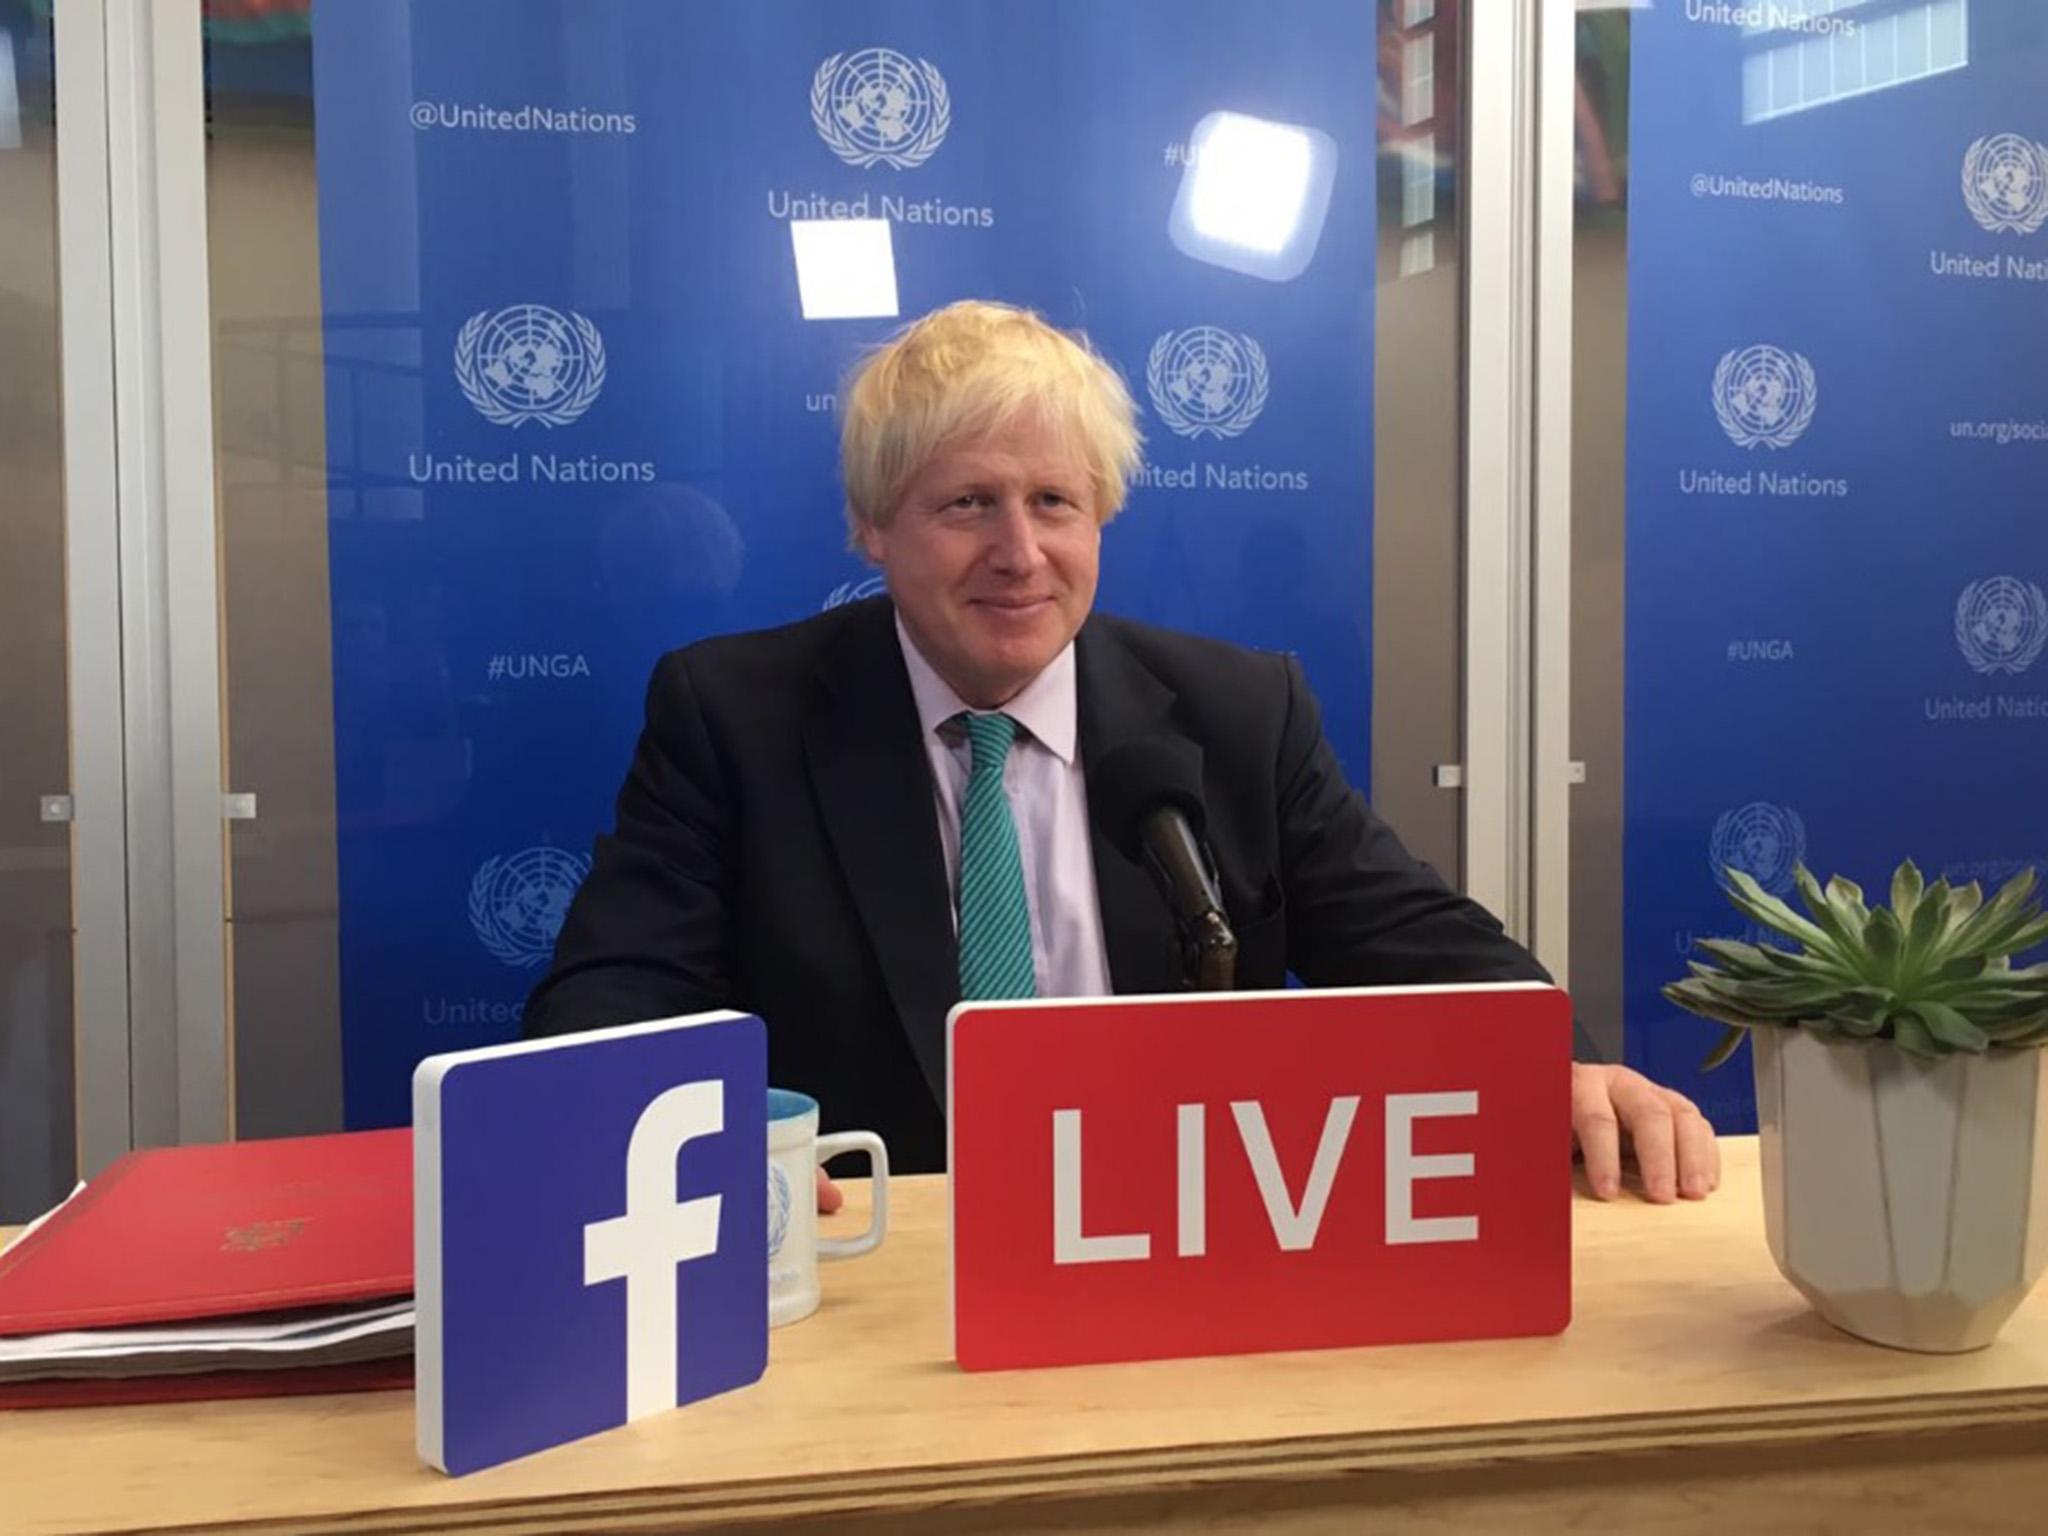 Boris Johnson told Facebook Live viewer that North Korea was a 'rogue nation'